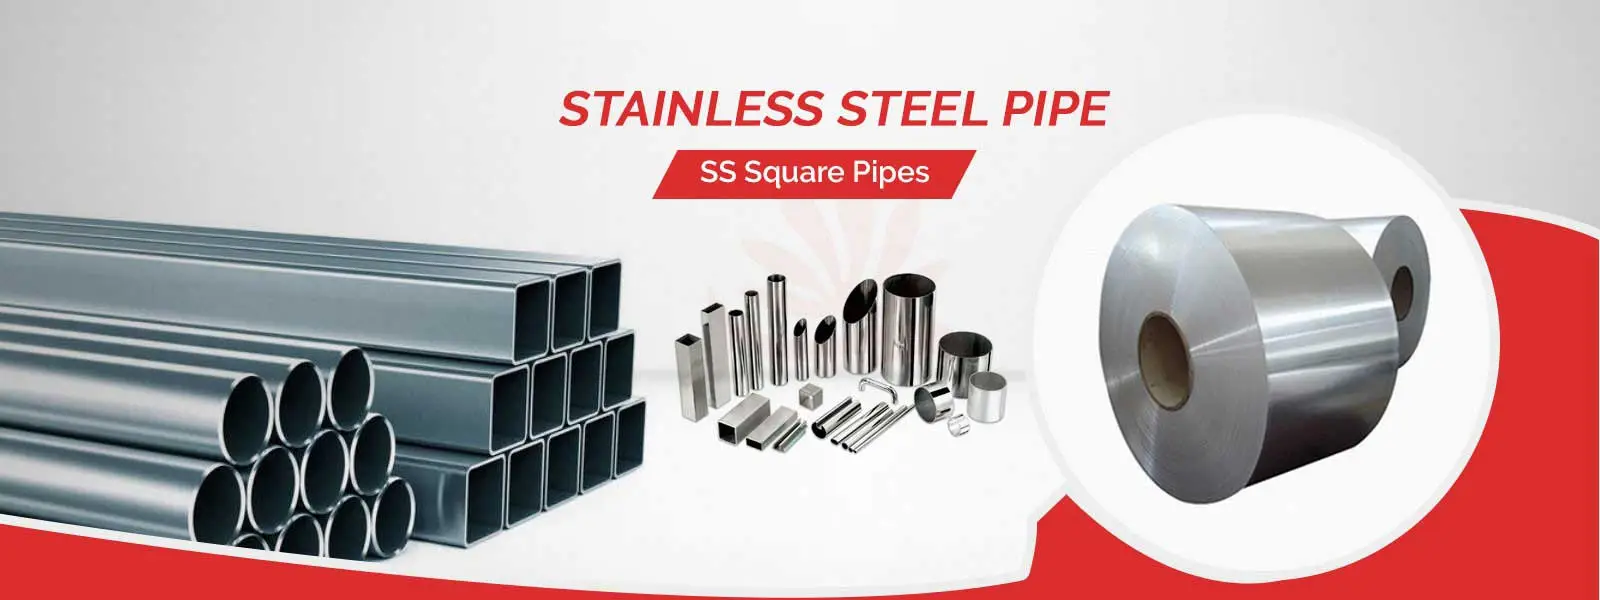 Stainless Steel Pipe Manufacturers in Mathura